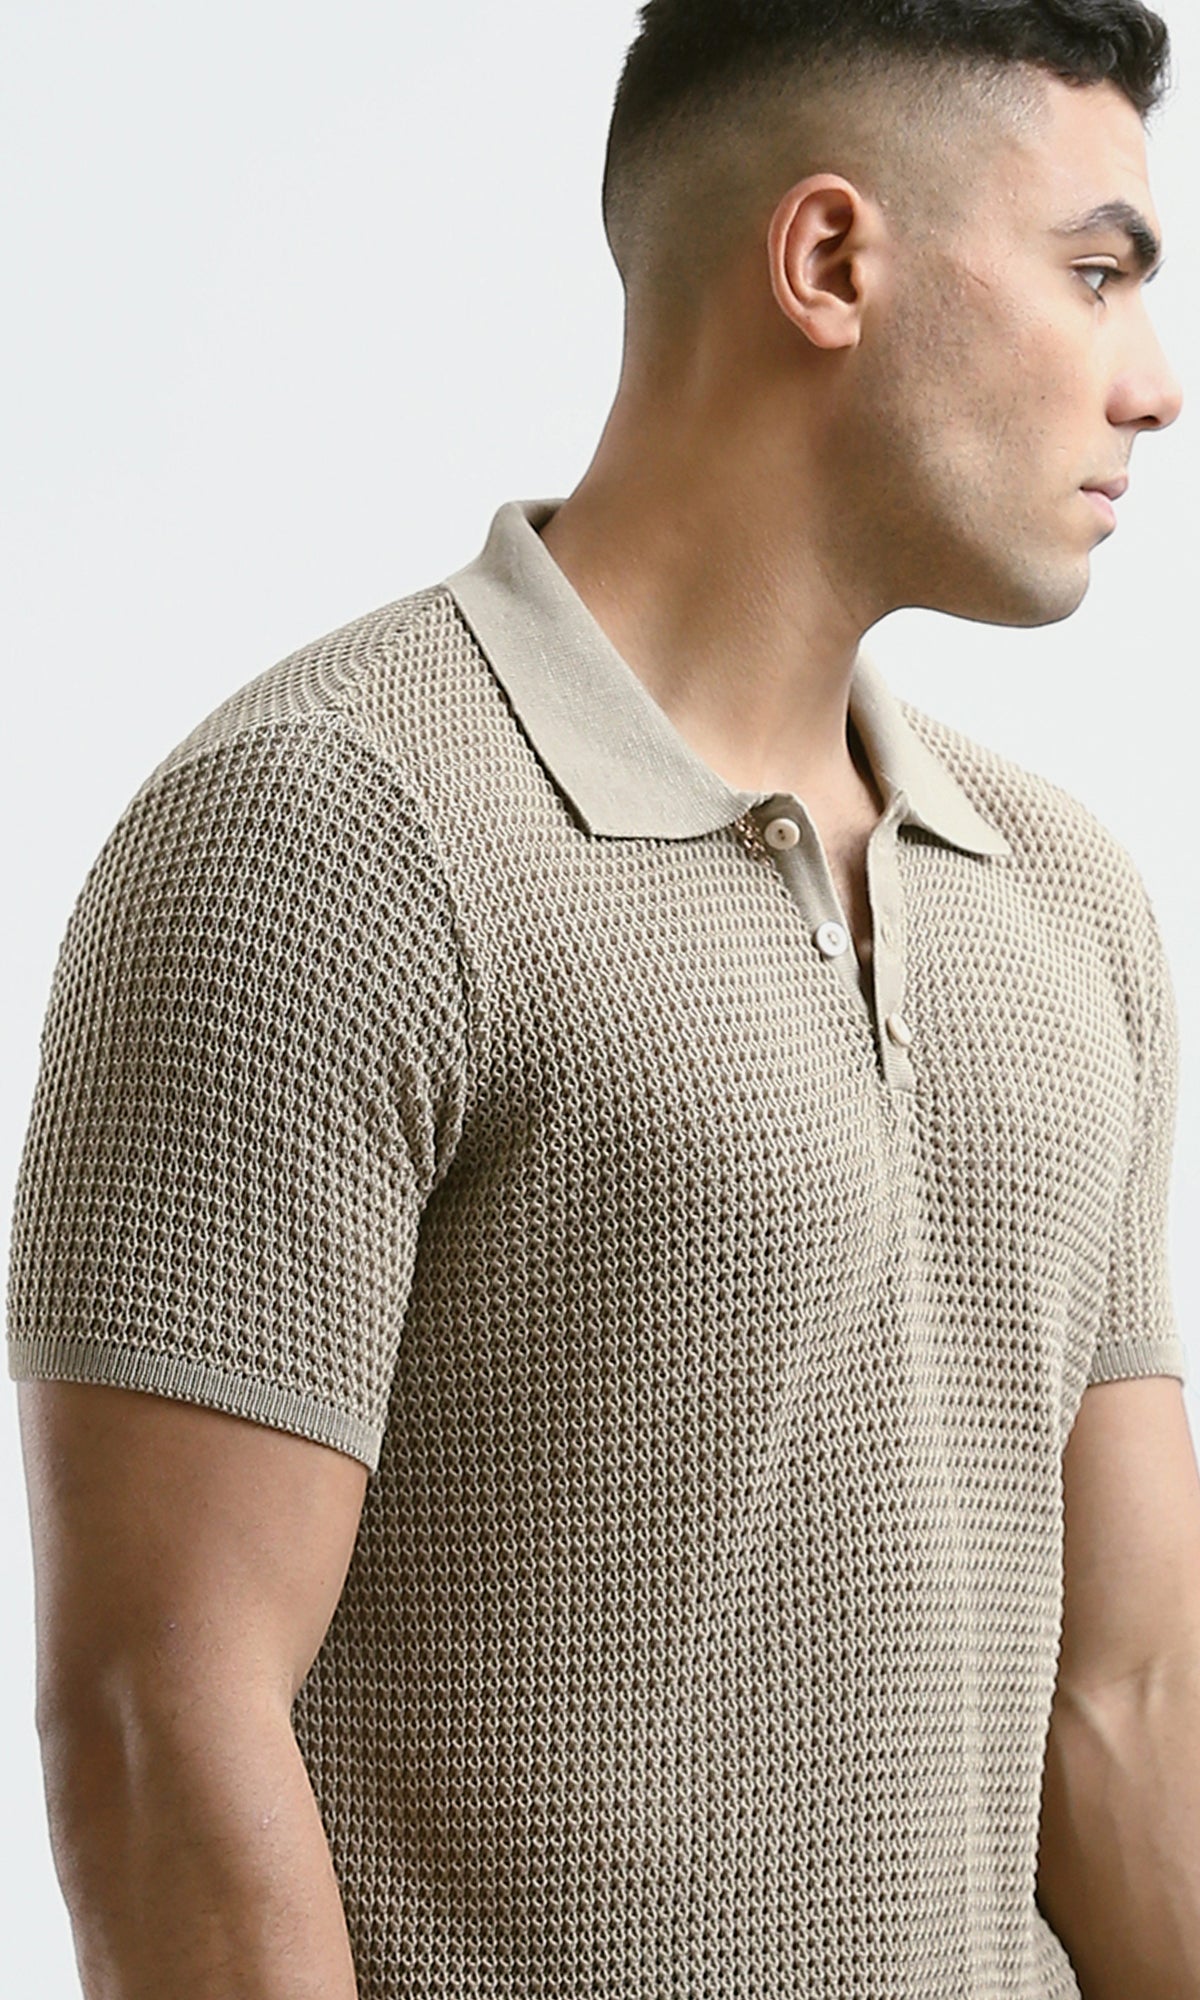 O182758 Buttoned Neck Dark Beige Knitted Polo Shirt